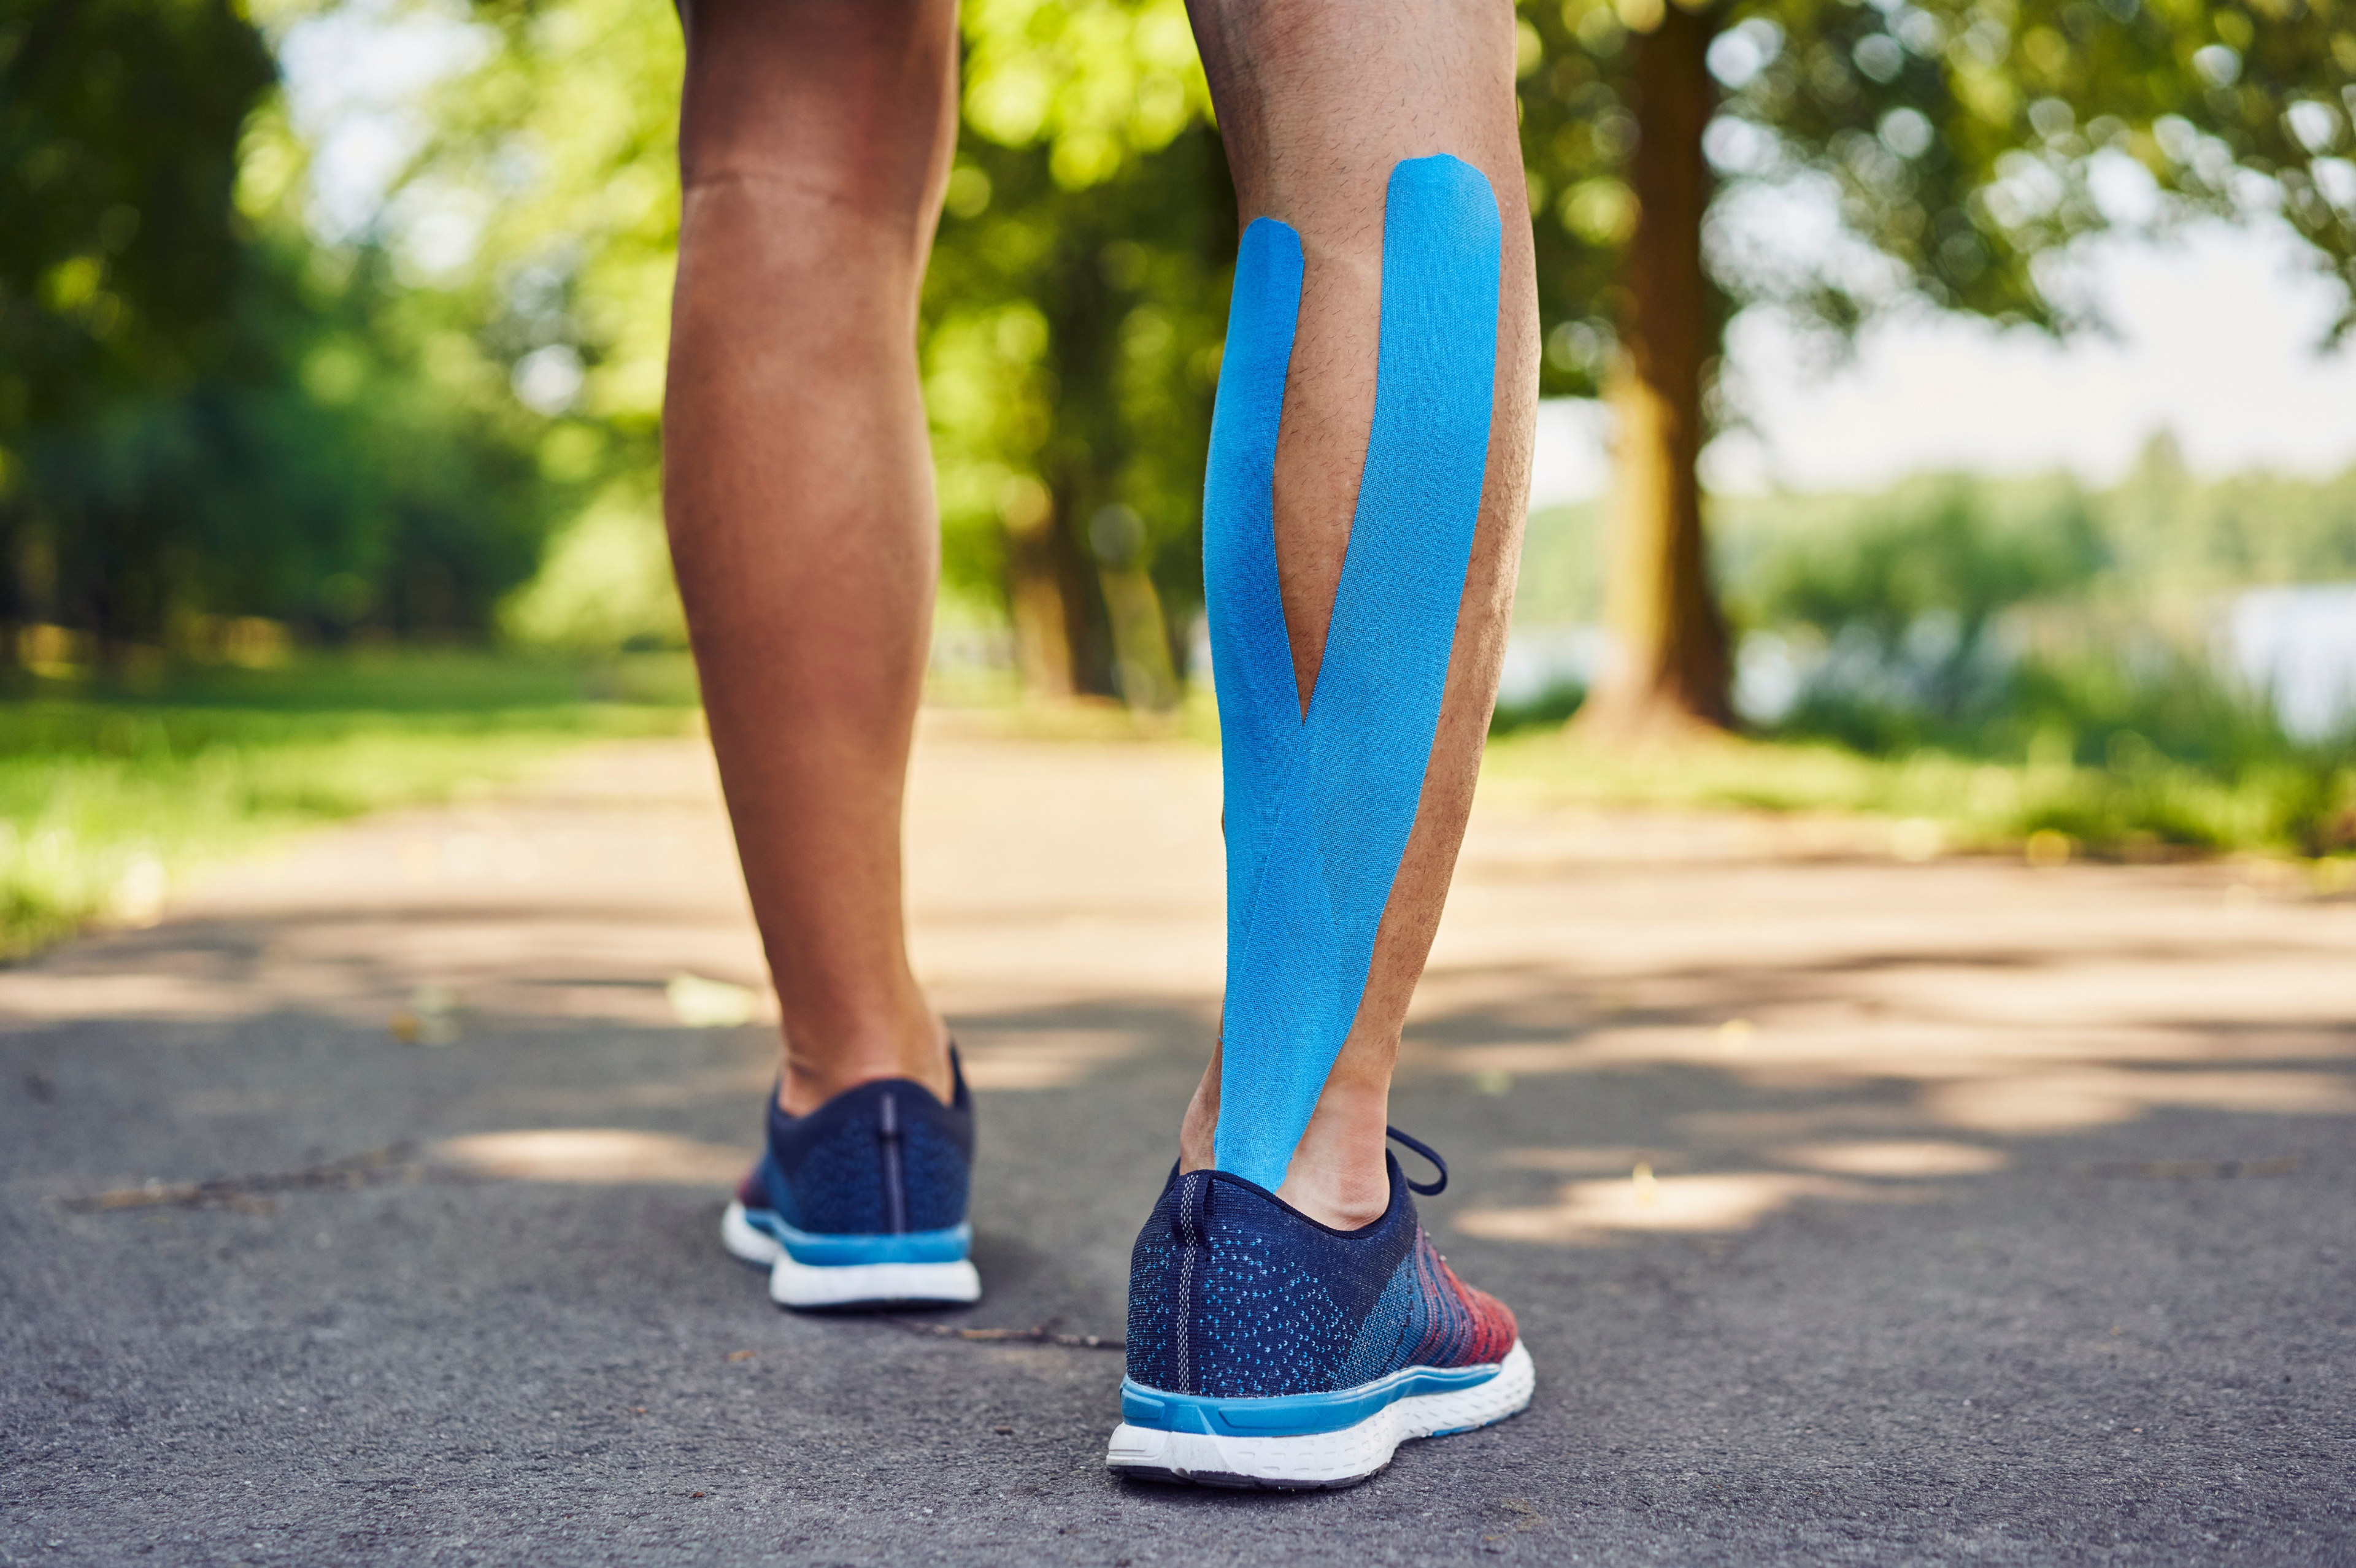 Kinesio tape is applied in many different ways, and so far, no method has been shown to work best.